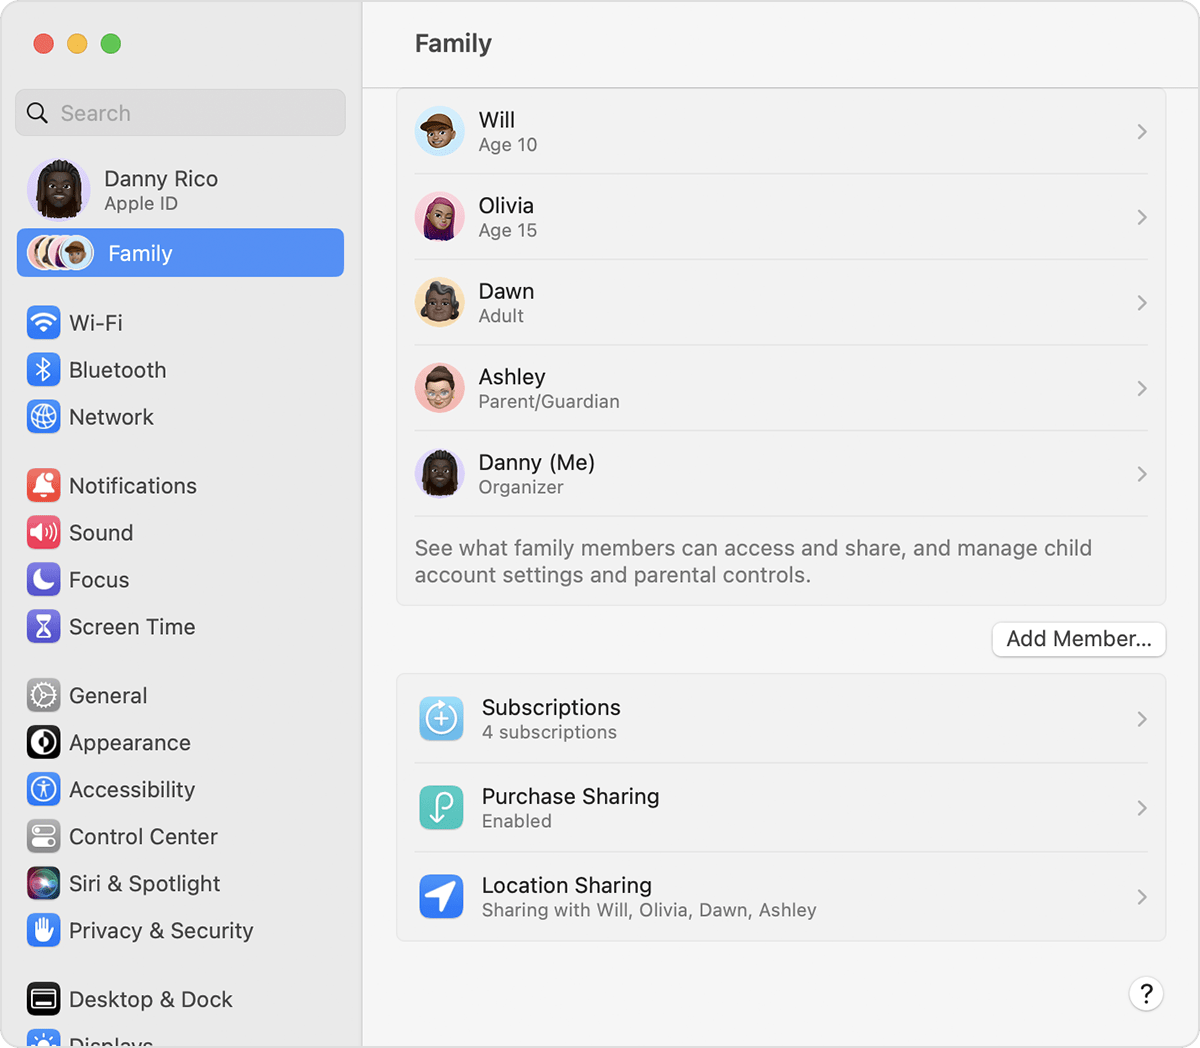 The Add Member button is below the list of your current family members.